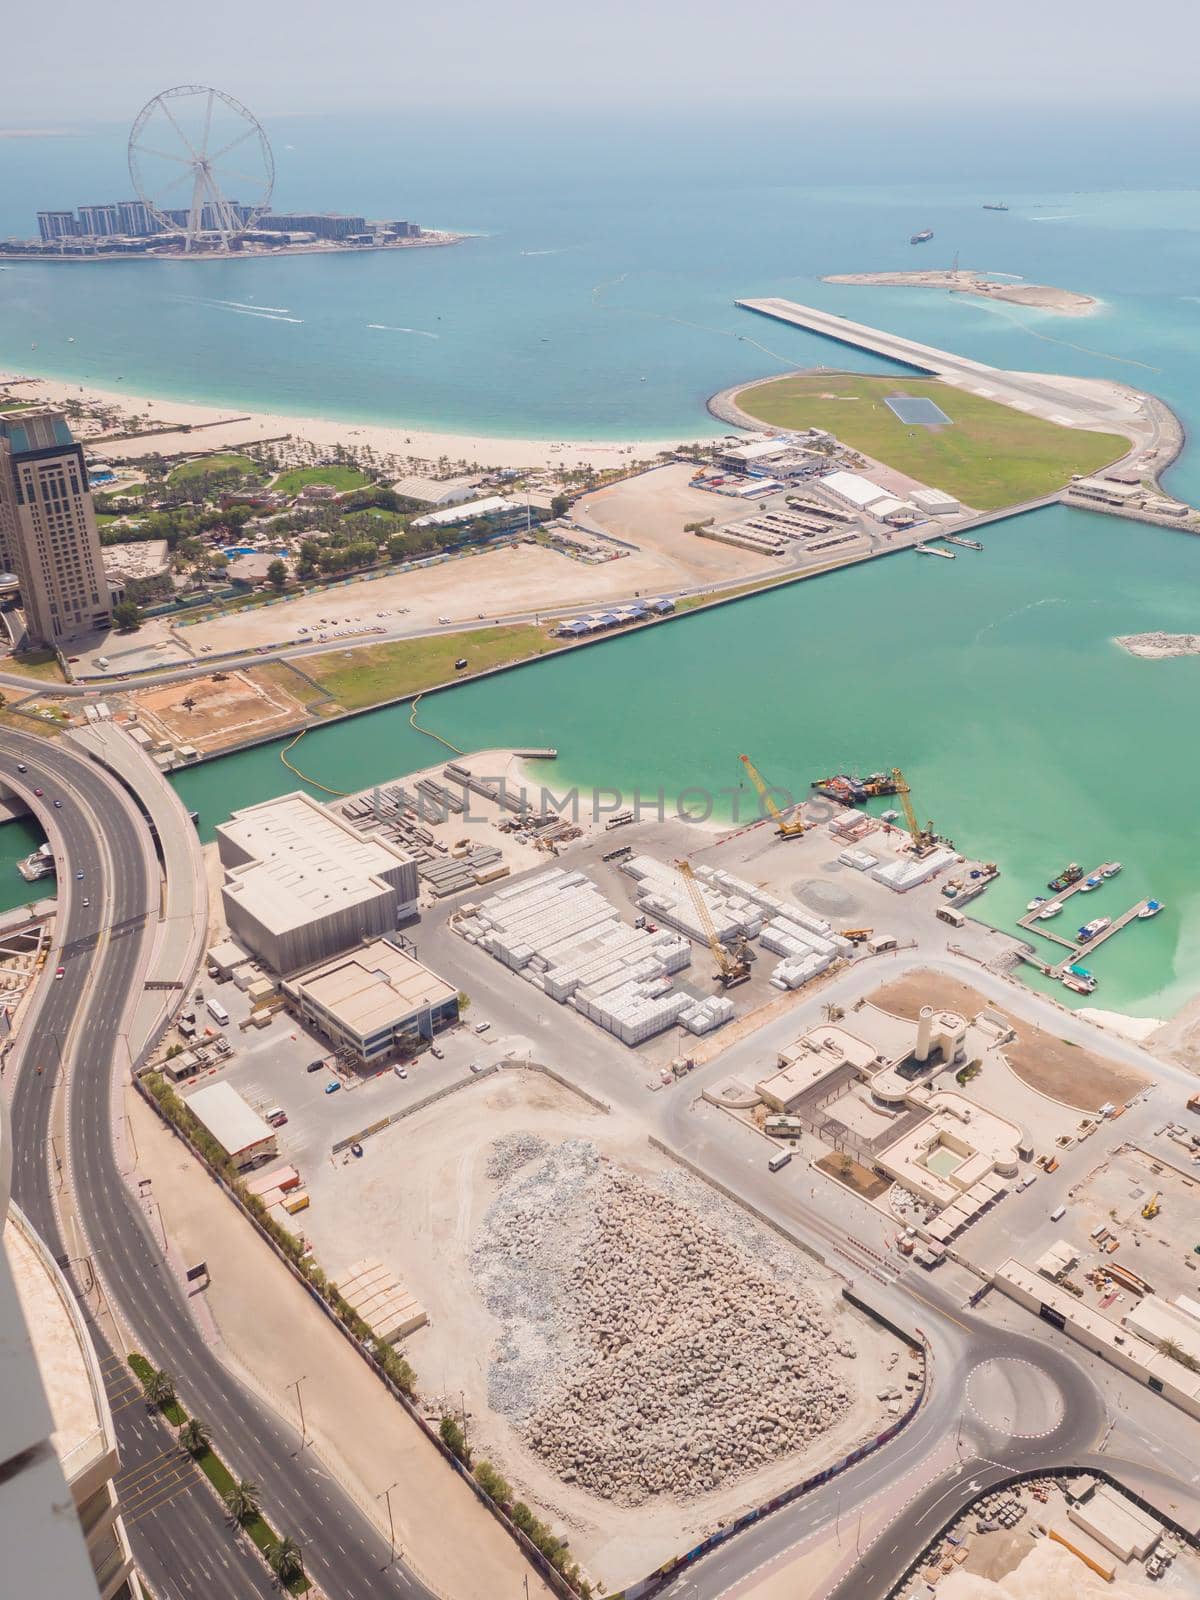 Construction of an artificial island Palm Jumeirah with construction equipment in Dubai. by DovidPro